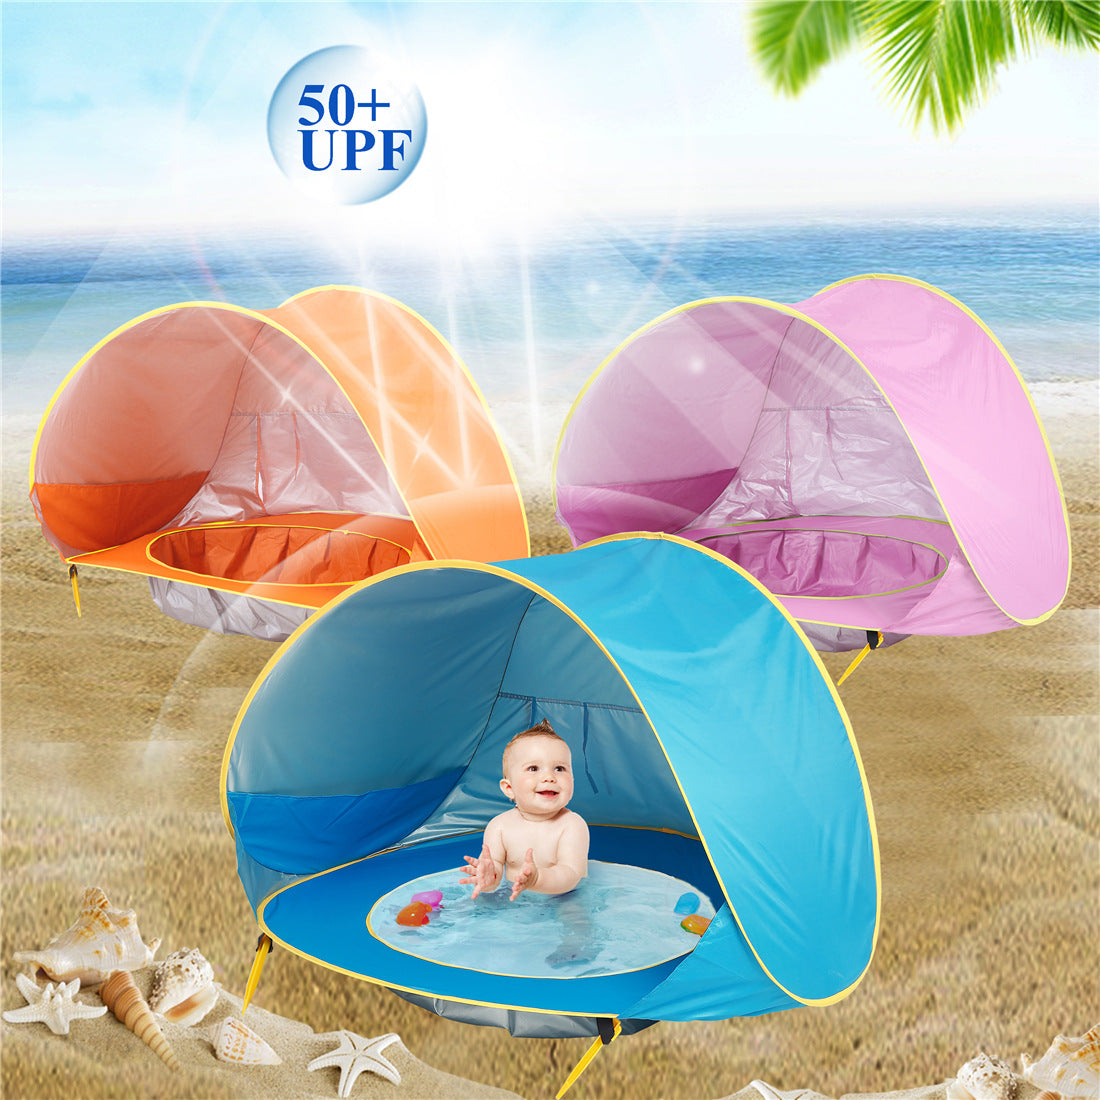 Baby Beach Tent, Outdoor Camping, Easy Fold Up, Waterproof, UV-protecting - Ricky's Garage